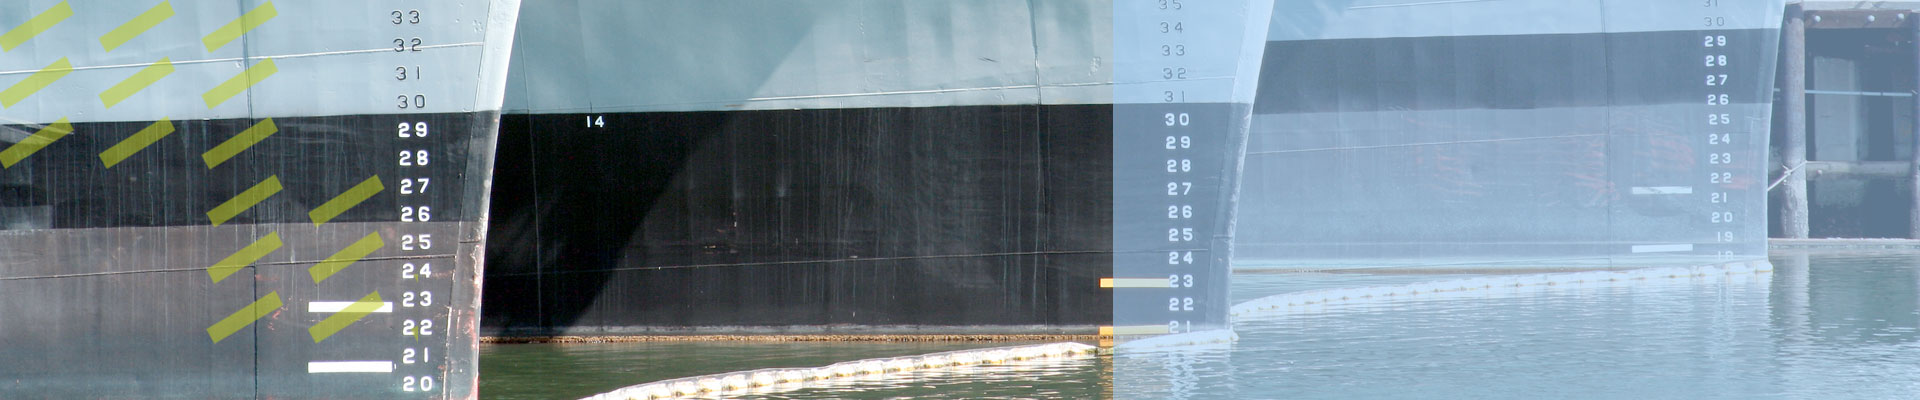 background image of three navy ship hulls docked in a row